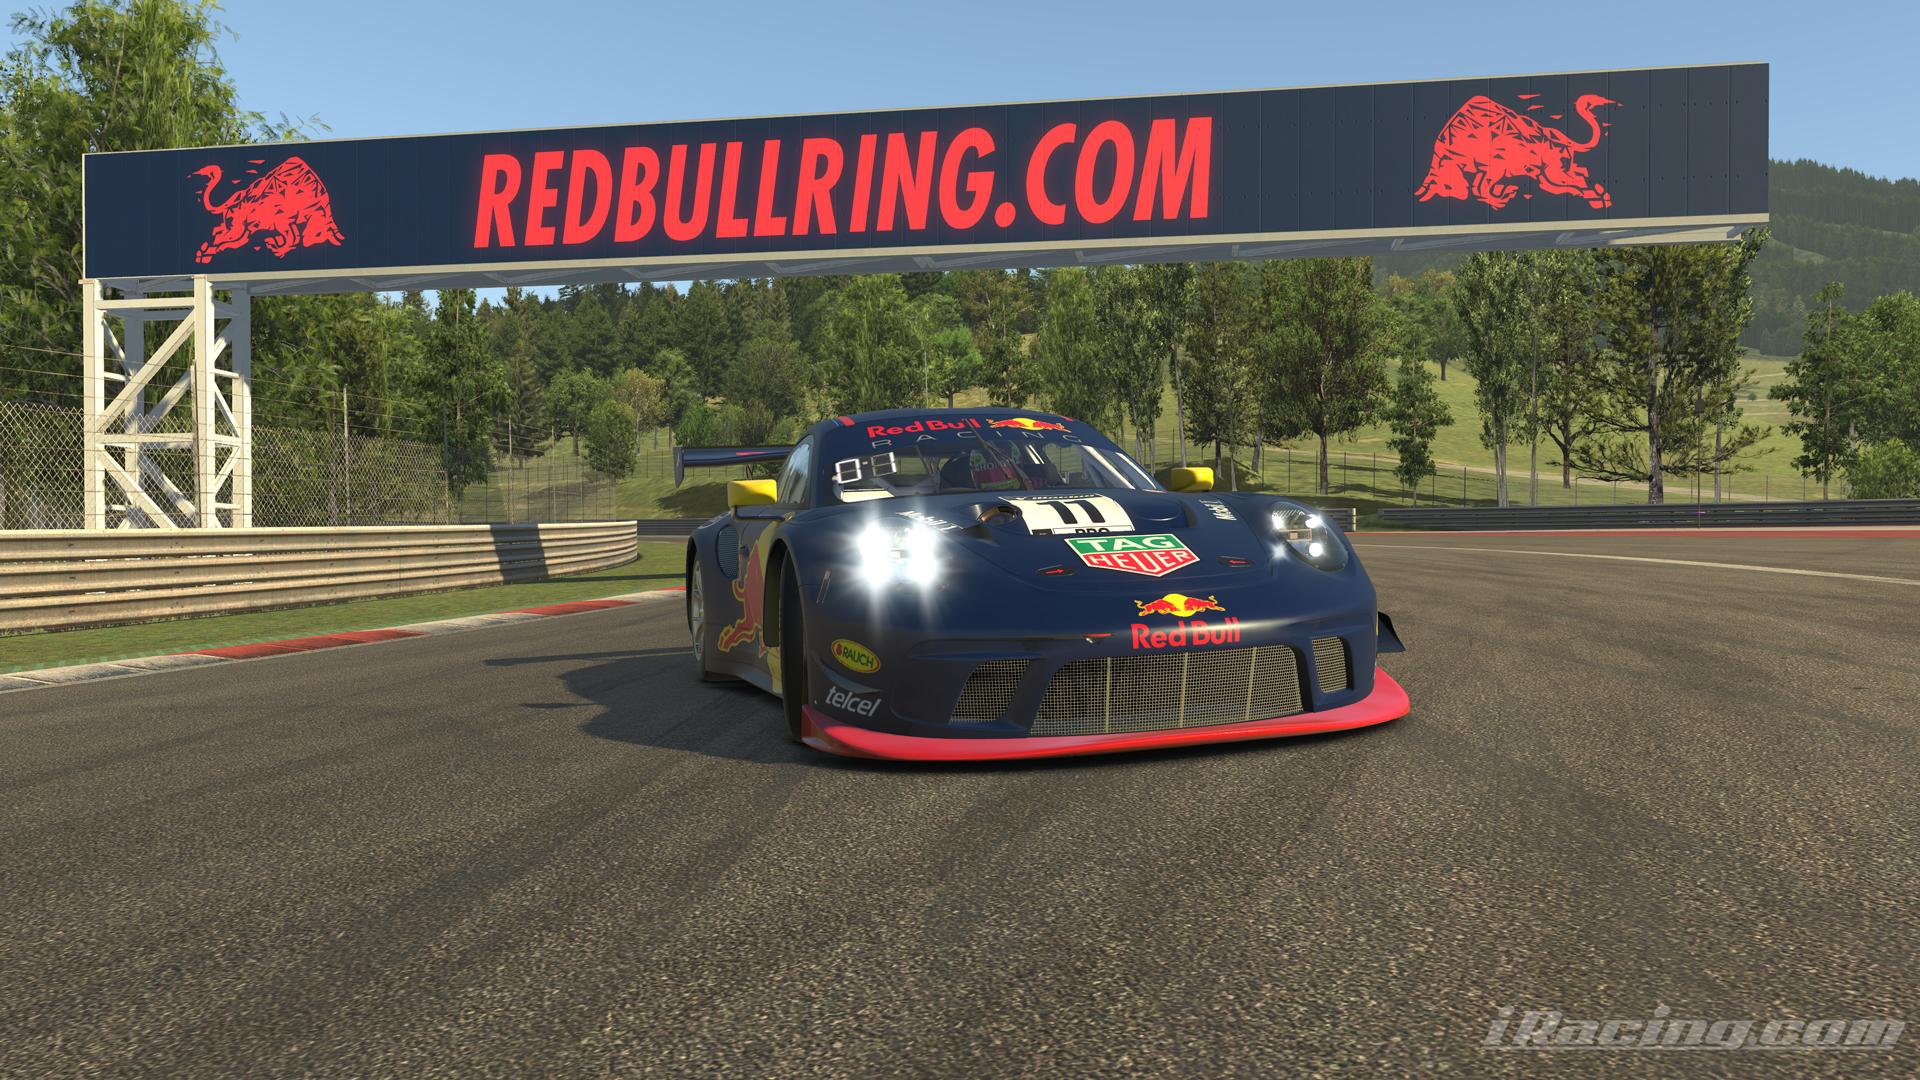 Preview of Red Bull Racing F1 Sergio Pérez 11 Livery - Porsche 911 GT3 R   by Gino Kelleners